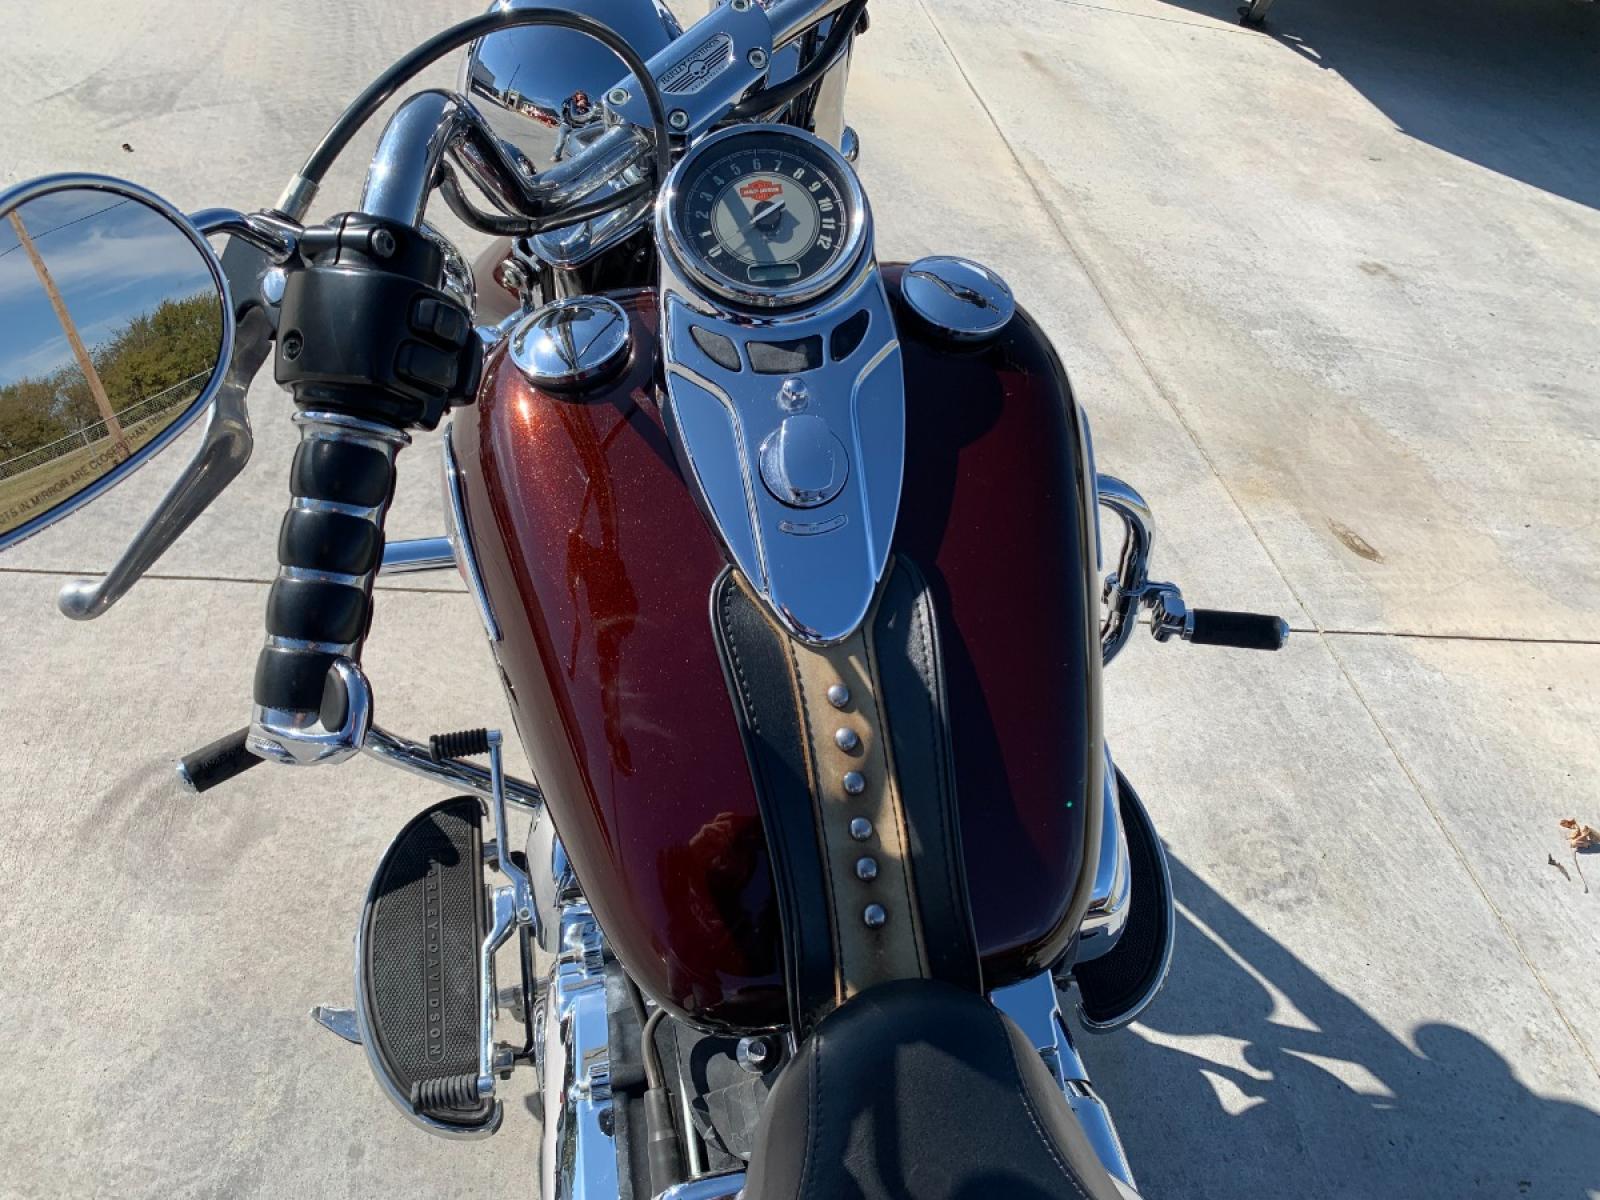 2009 PURPLE Harley-Davidson FLSTC - (1HD1BW5199Y) , located at 17760 HWY 62, MORRIS, 74445, 35.609104, -95.877060 - 2009 HARLEY- DAVIDSON FLSTC HERITAGE SOFTAIL 1584CC FEATURES CRUISE CONTROL, CHROME PASSING LAMPS, CHROME STAGGERED SHORTY EXHAUST WITH DUAL MUFFLERS, STUDDED LEATHER SADDLEBAGS, AND A FULL WINDSHIELD. A SMOOTH RIDE FOR LONG-RANGE TOURING COMFORT. IT RUNS GREAT !! ONLY 14,596 MILES. ** REBUILT TITLE - Photo #21